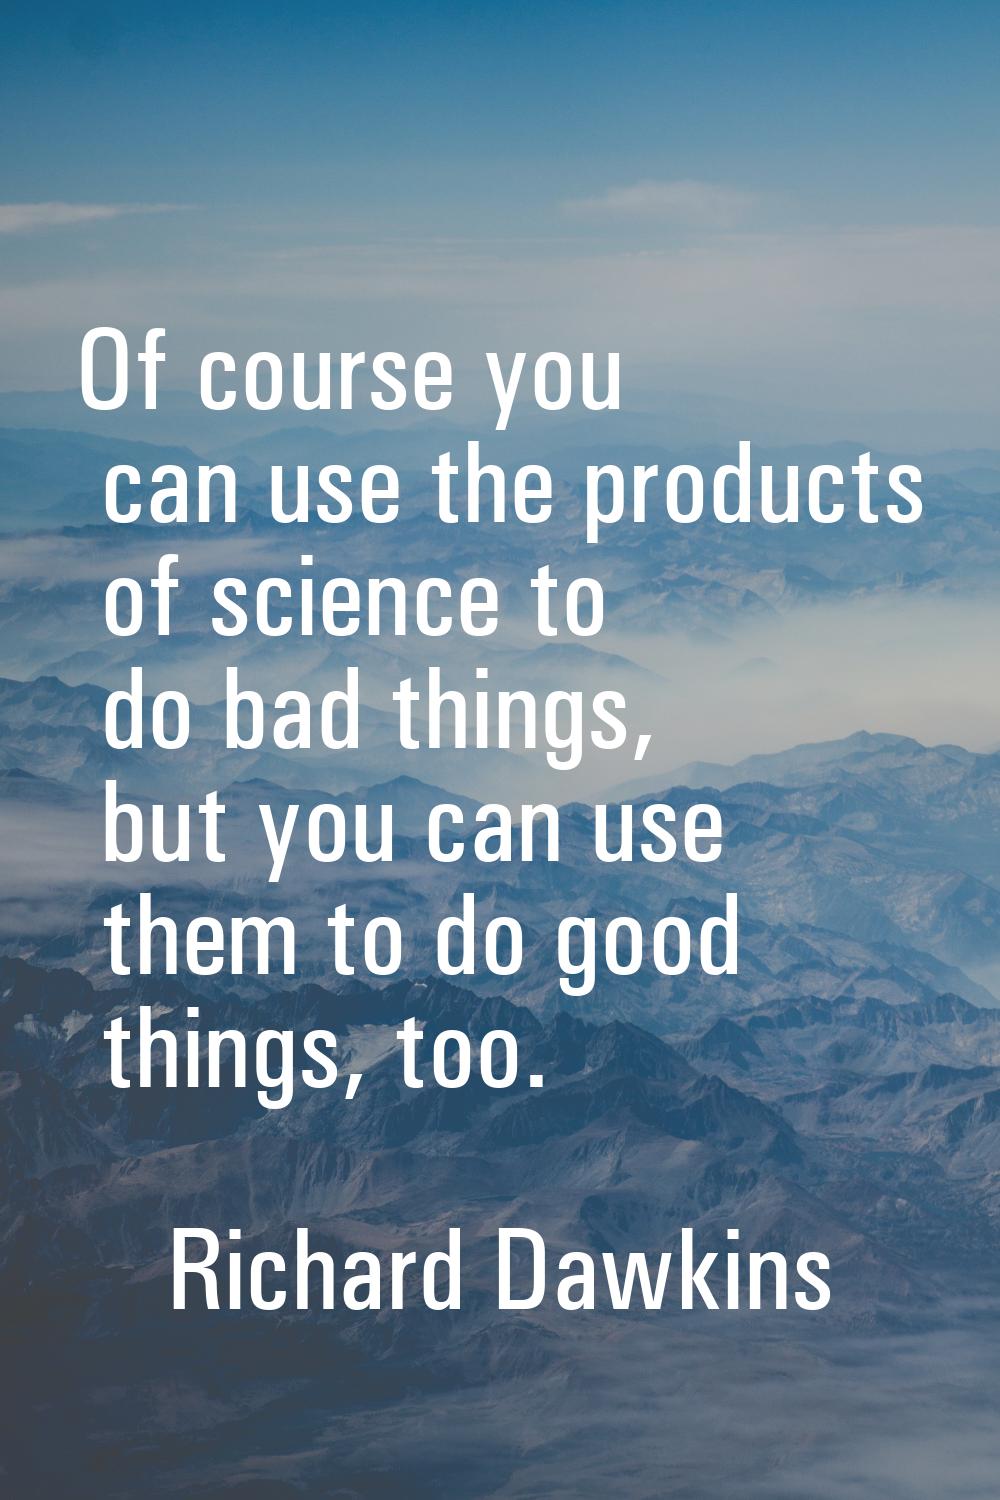 Of course you can use the products of science to do bad things, but you can use them to do good thi